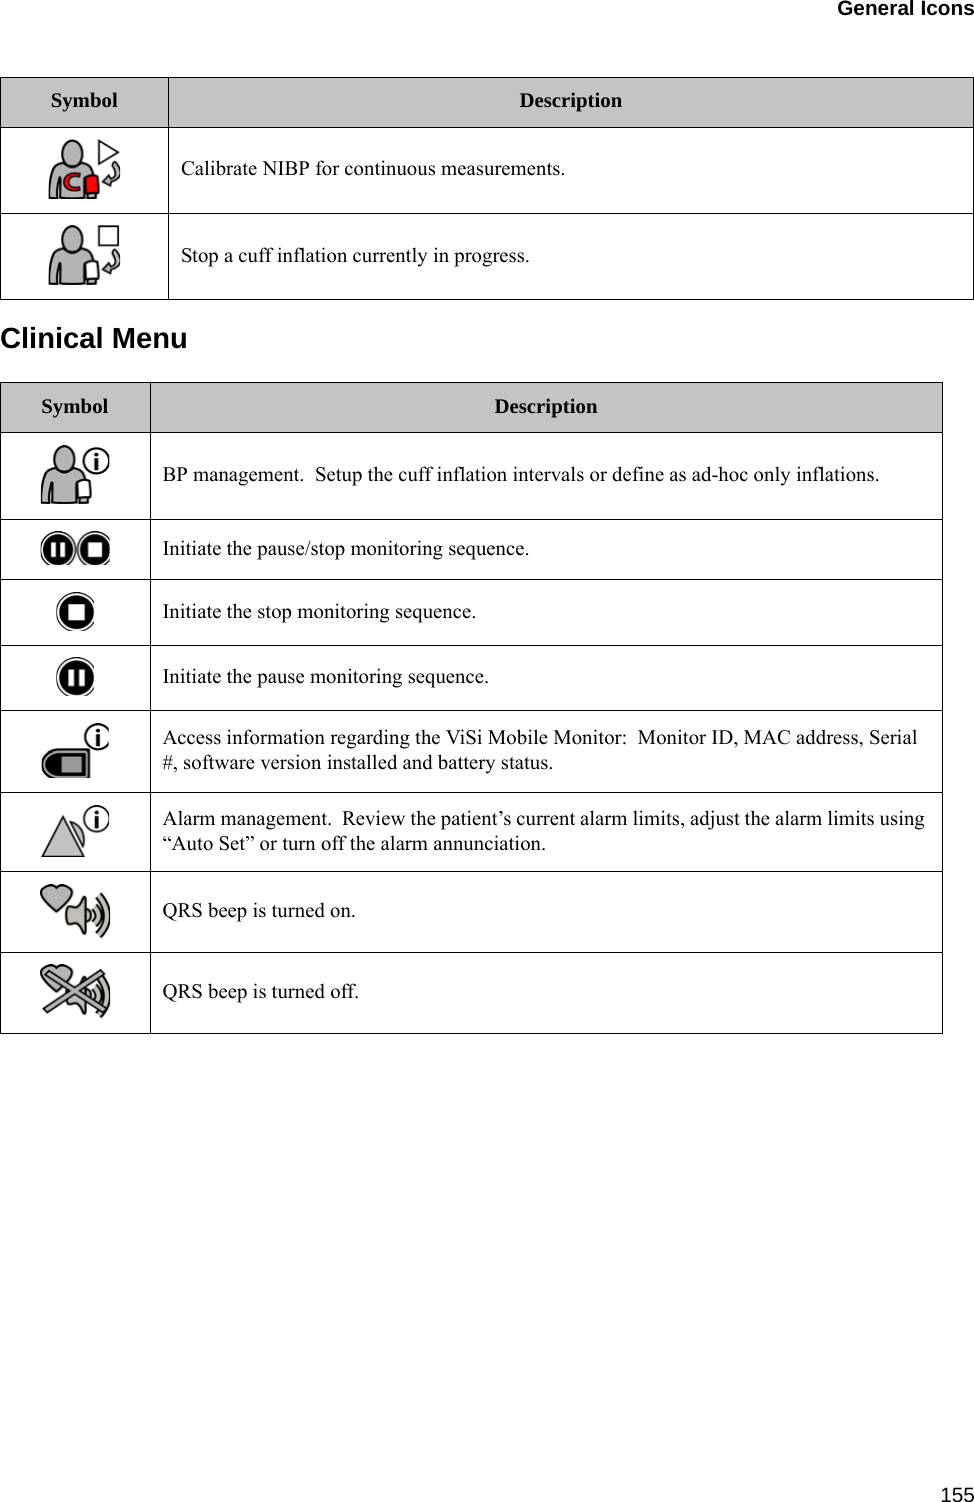 General Icons155Clinical MenuCalibrate NIBP for continuous measurements.Stop a cuff inflation currently in progress.Symbol DescriptionBP management.  Setup the cuff inflation intervals or define as ad-hoc only inflations.Initiate the pause/stop monitoring sequence.Initiate the stop monitoring sequence.Initiate the pause monitoring sequence.Access information regarding the ViSi Mobile Monitor:  Monitor ID, MAC address, Serial #, software version installed and battery status.Alarm management.  Review the patient’s current alarm limits, adjust the alarm limits using “Auto Set” or turn off the alarm annunciation.QRS beep is turned on.QRS beep is turned off.Symbol Description